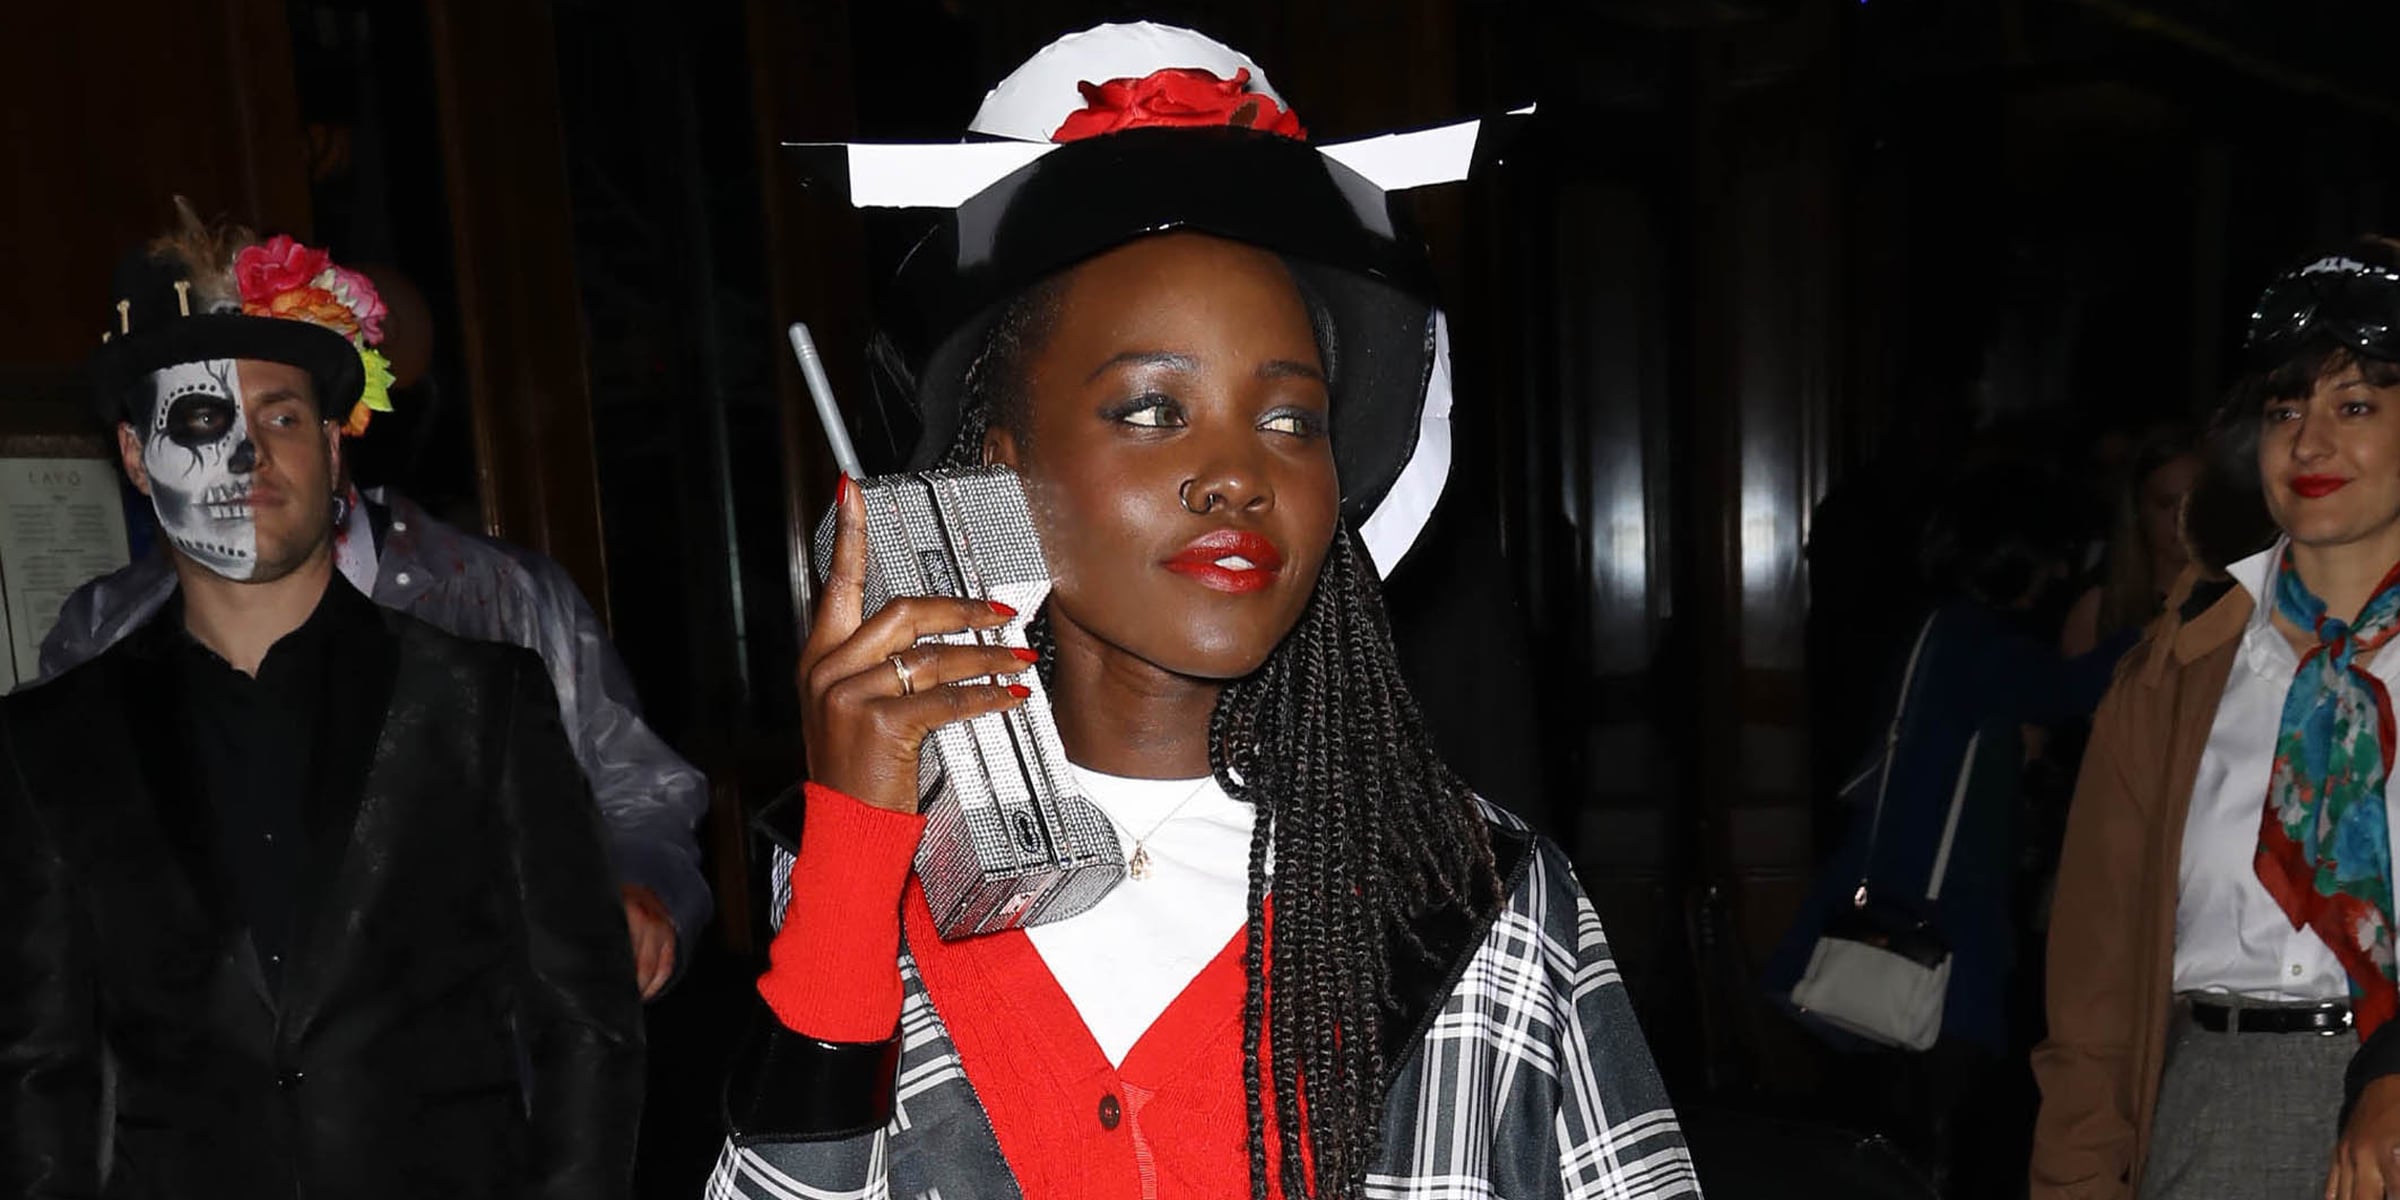 11 Problematic Halloween Costume Ideas You Should Avoid